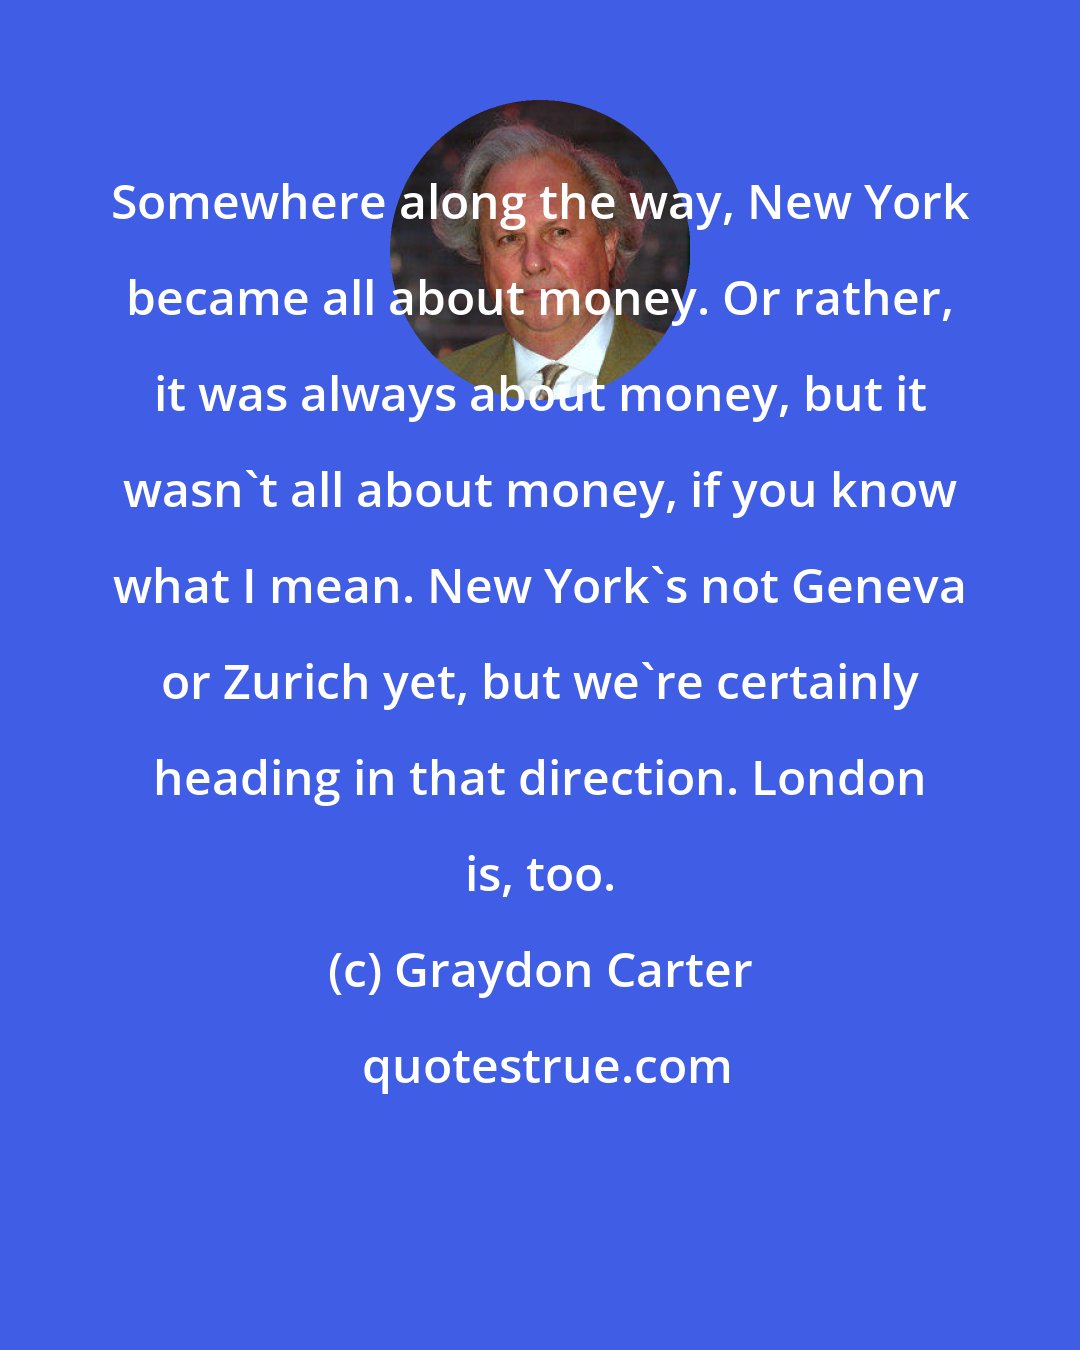 Graydon Carter: Somewhere along the way, New York became all about money. Or rather, it was always about money, but it wasn't all about money, if you know what I mean. New York's not Geneva or Zurich yet, but we're certainly heading in that direction. London is, too.